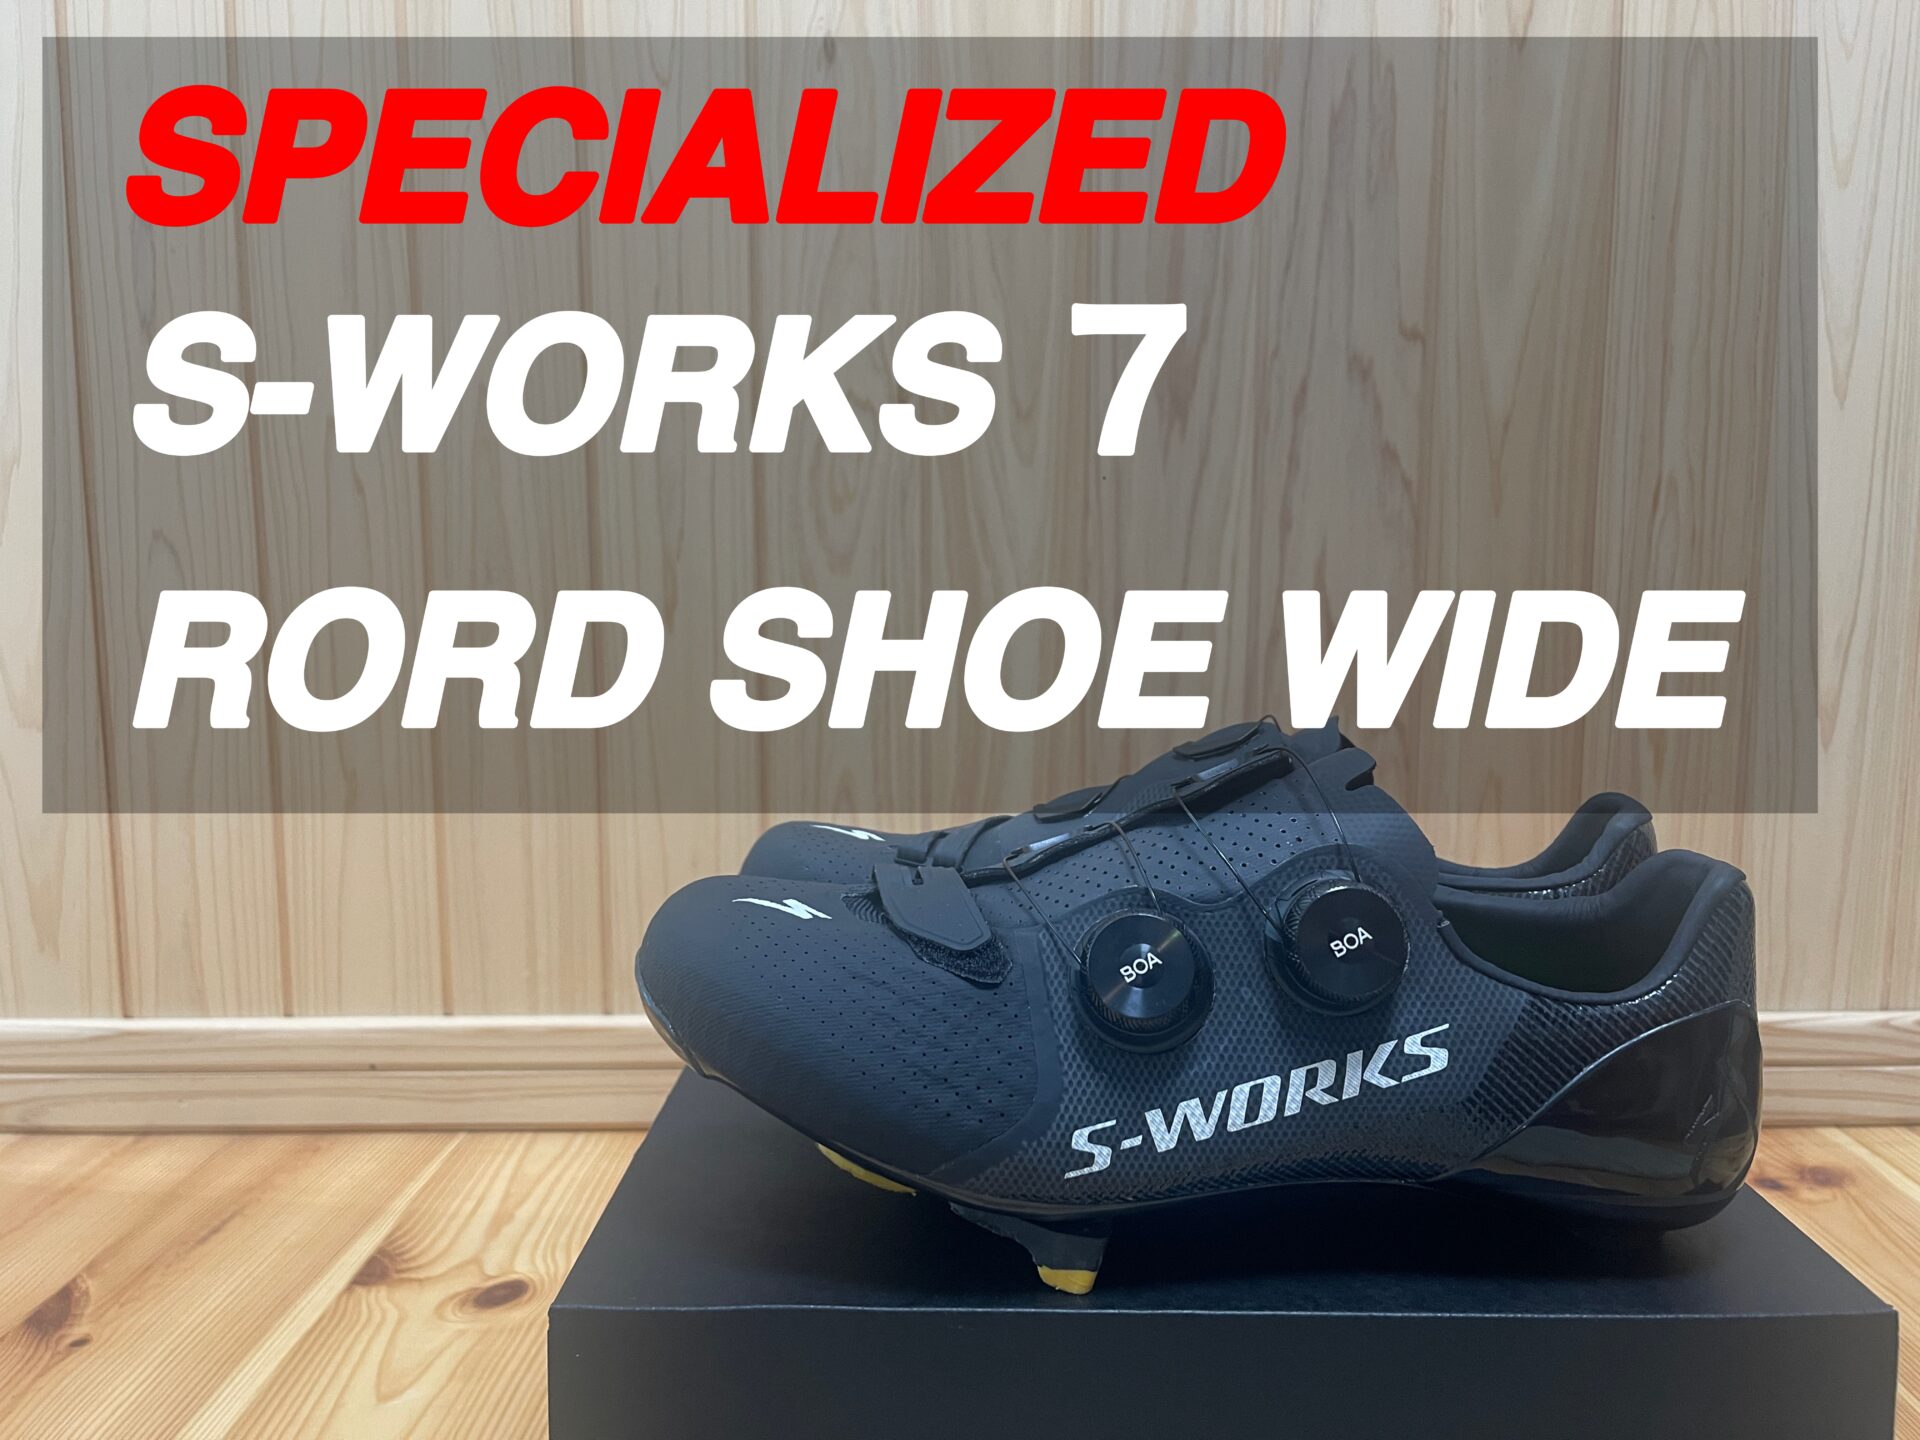 SPESIALIZED【S-WORKS ７ RORD SHOE WIDE】レビュー｜パタシンブログ 